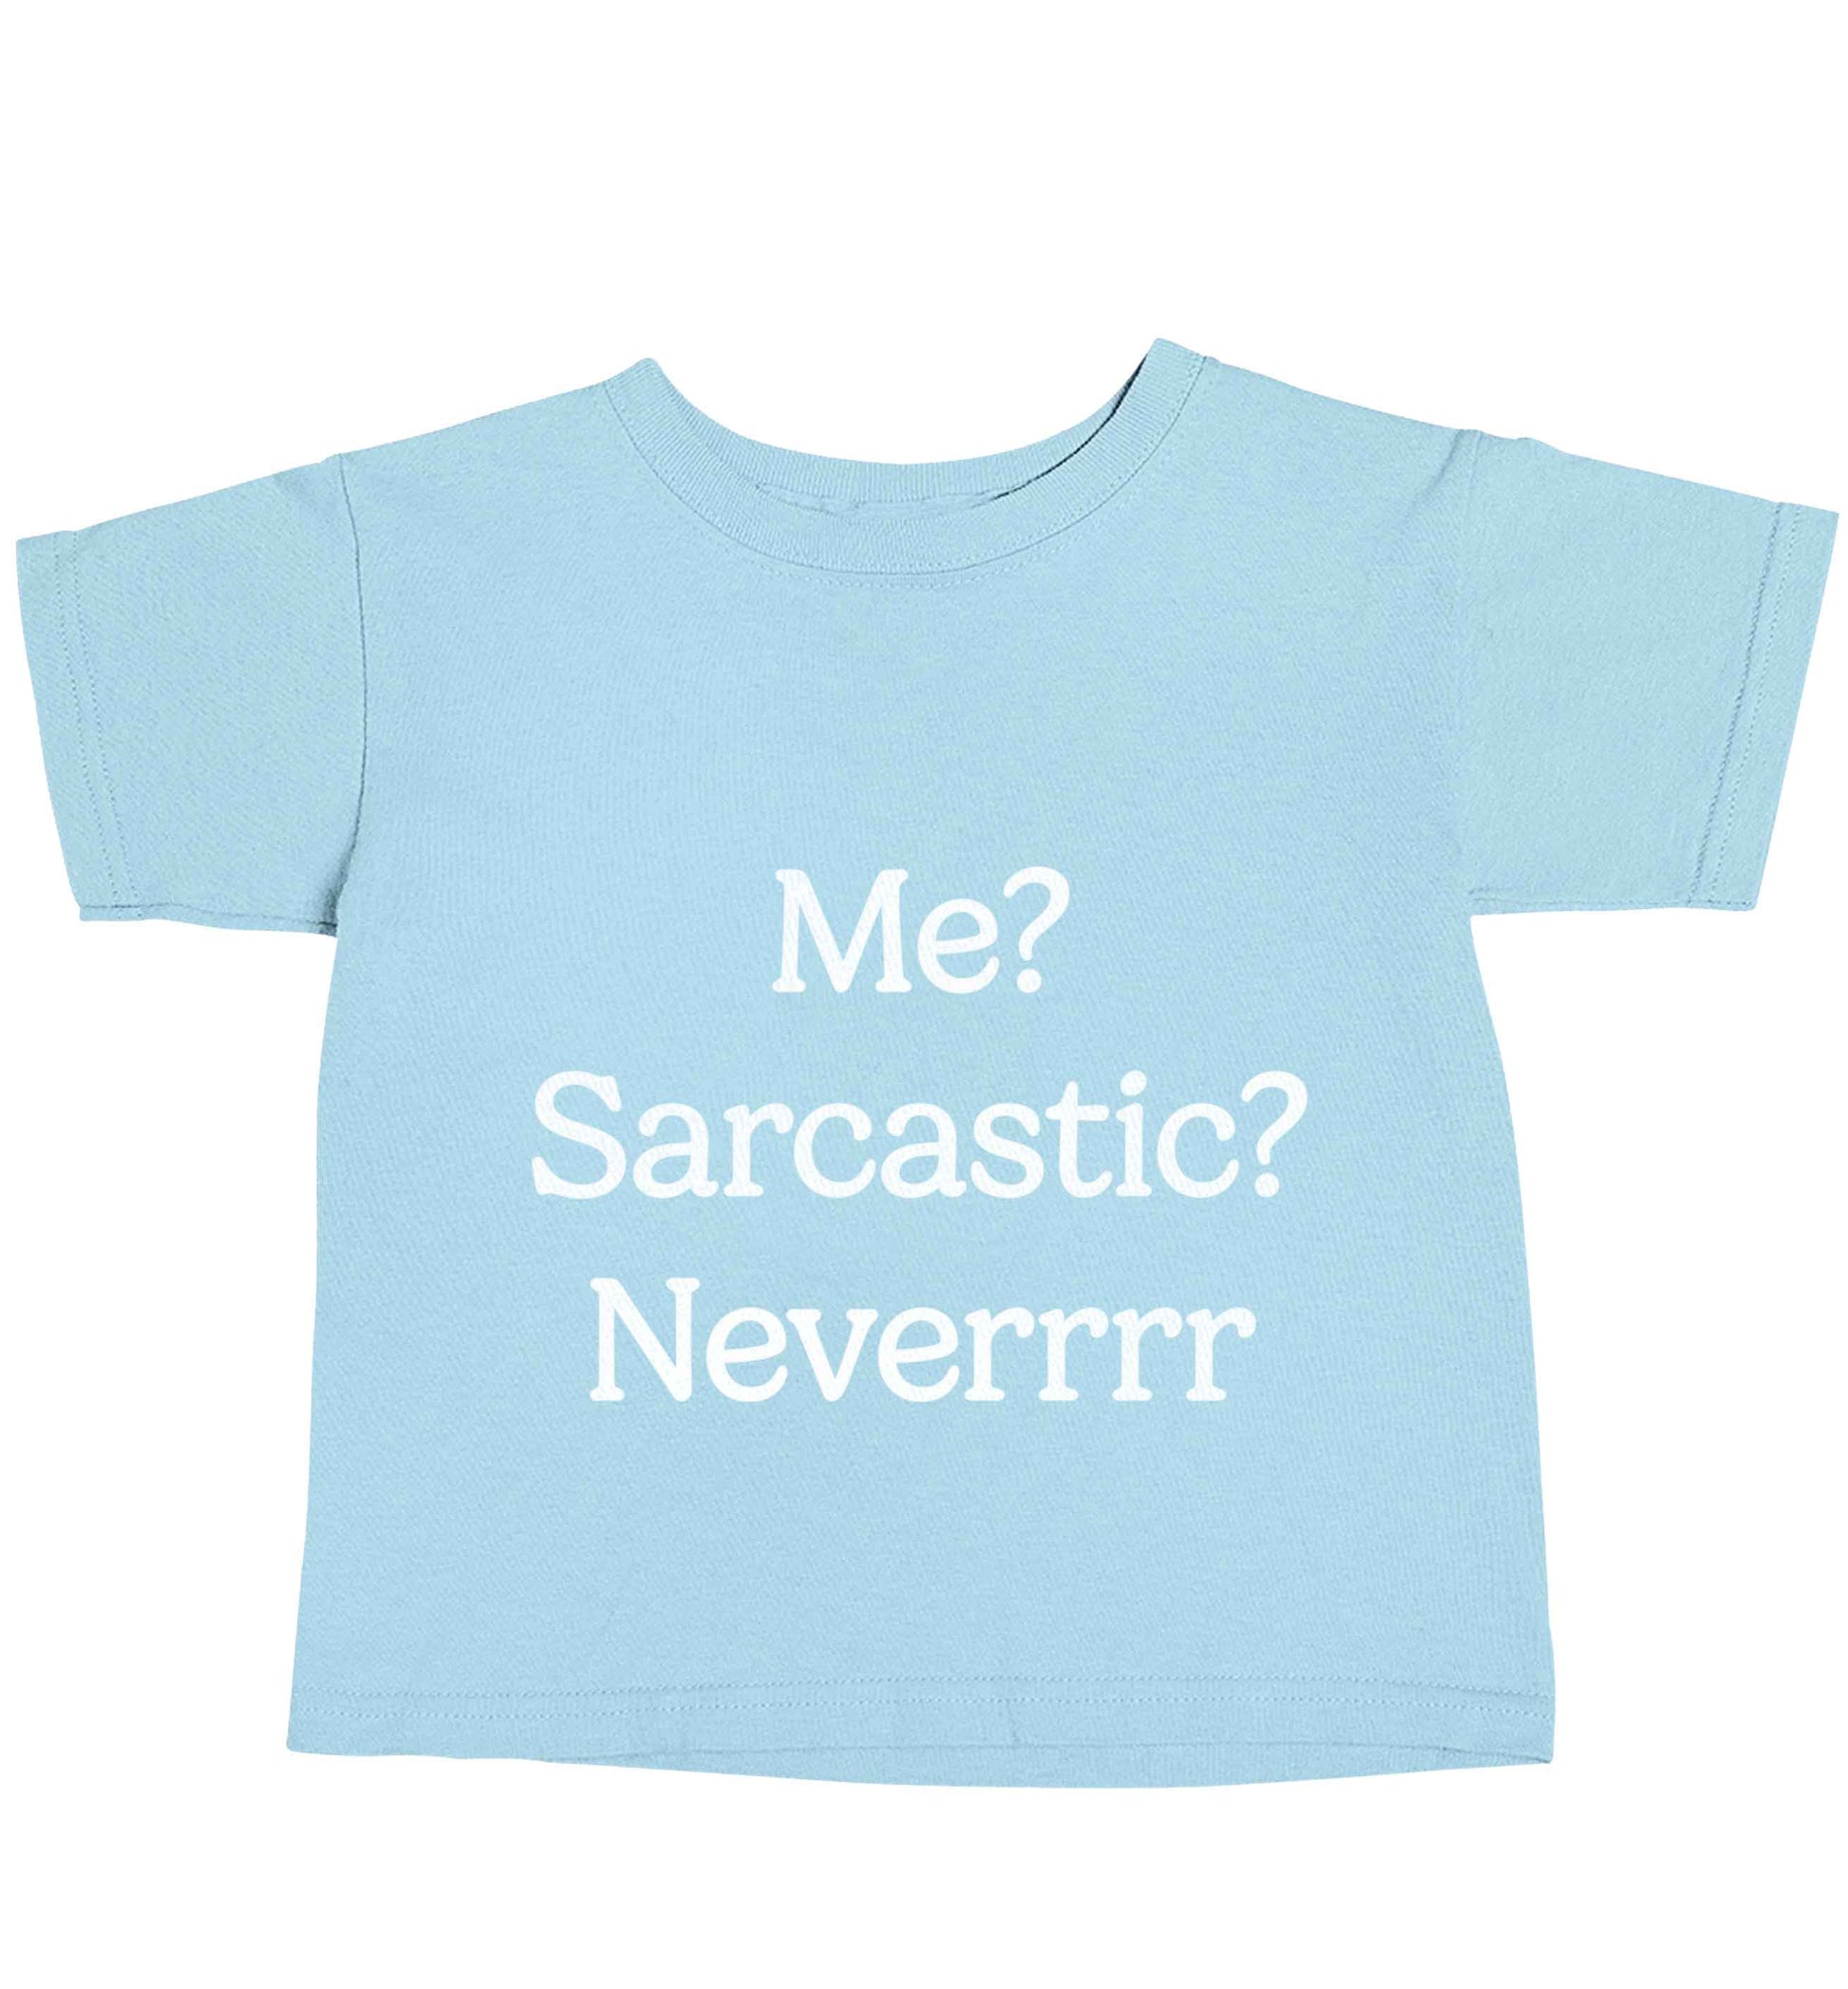 Me? sarcastic? never light blue baby toddler Tshirt 2 Years